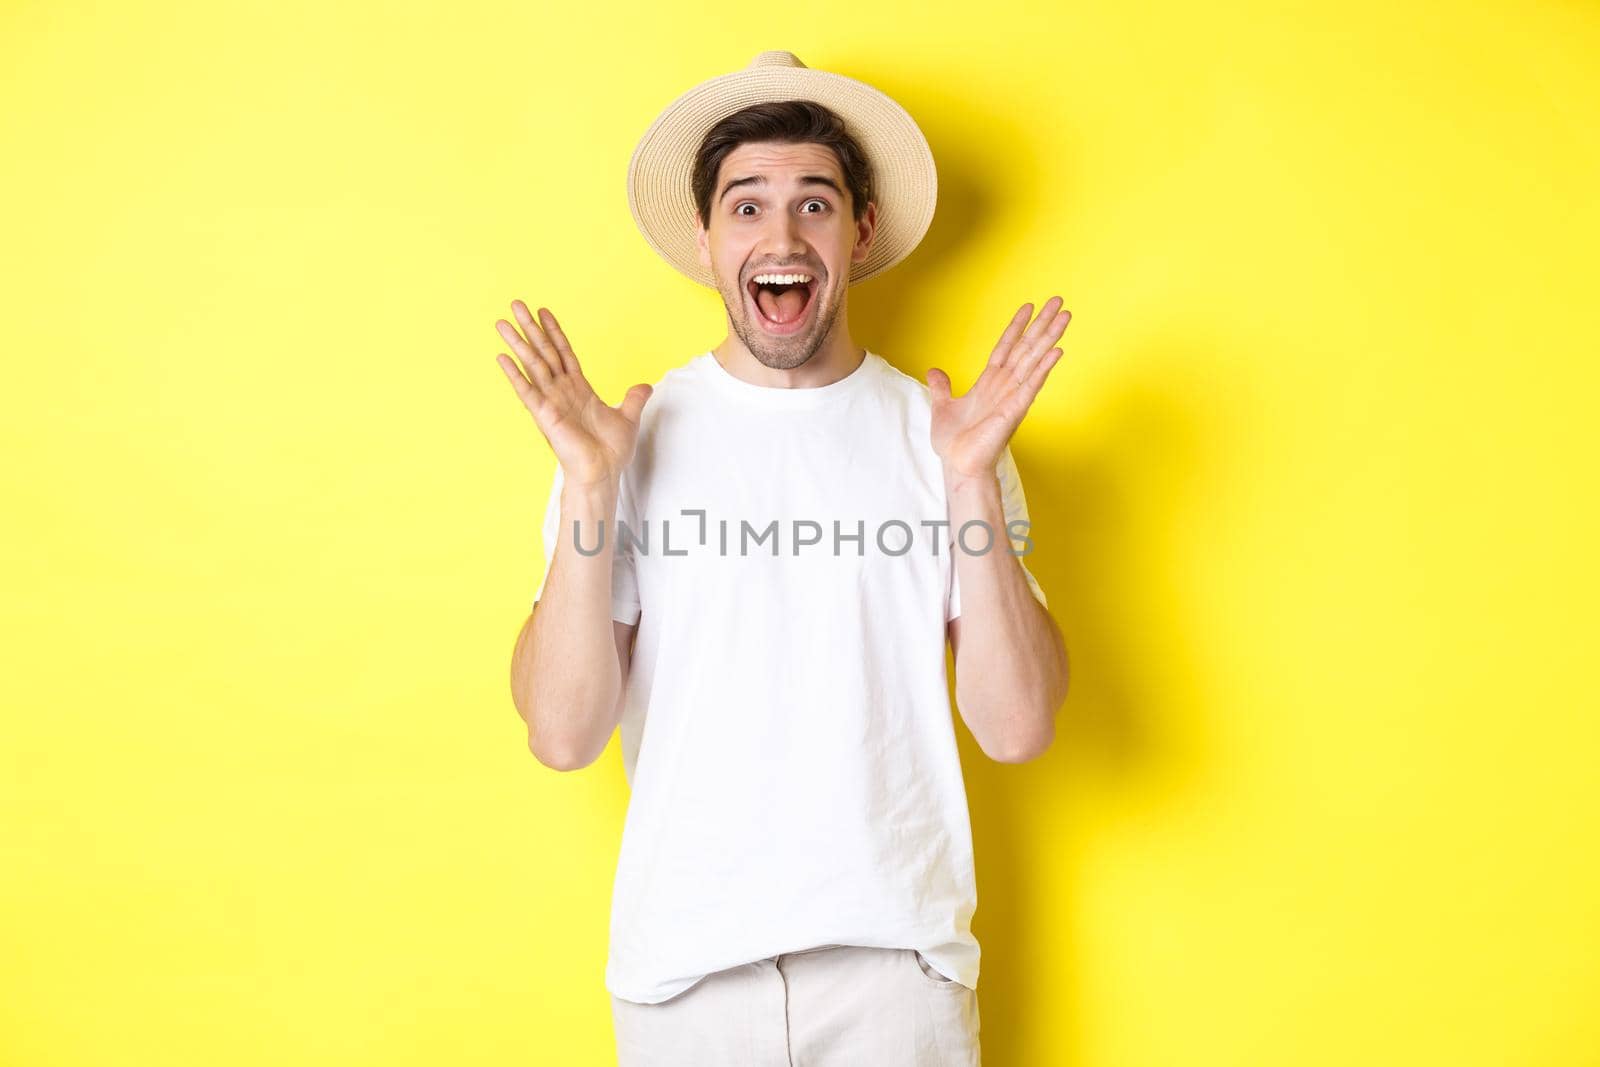 Concept of tourism and summer. Happy young man in straw hat looking amazed, reacting to surprise, standing over yellow background.